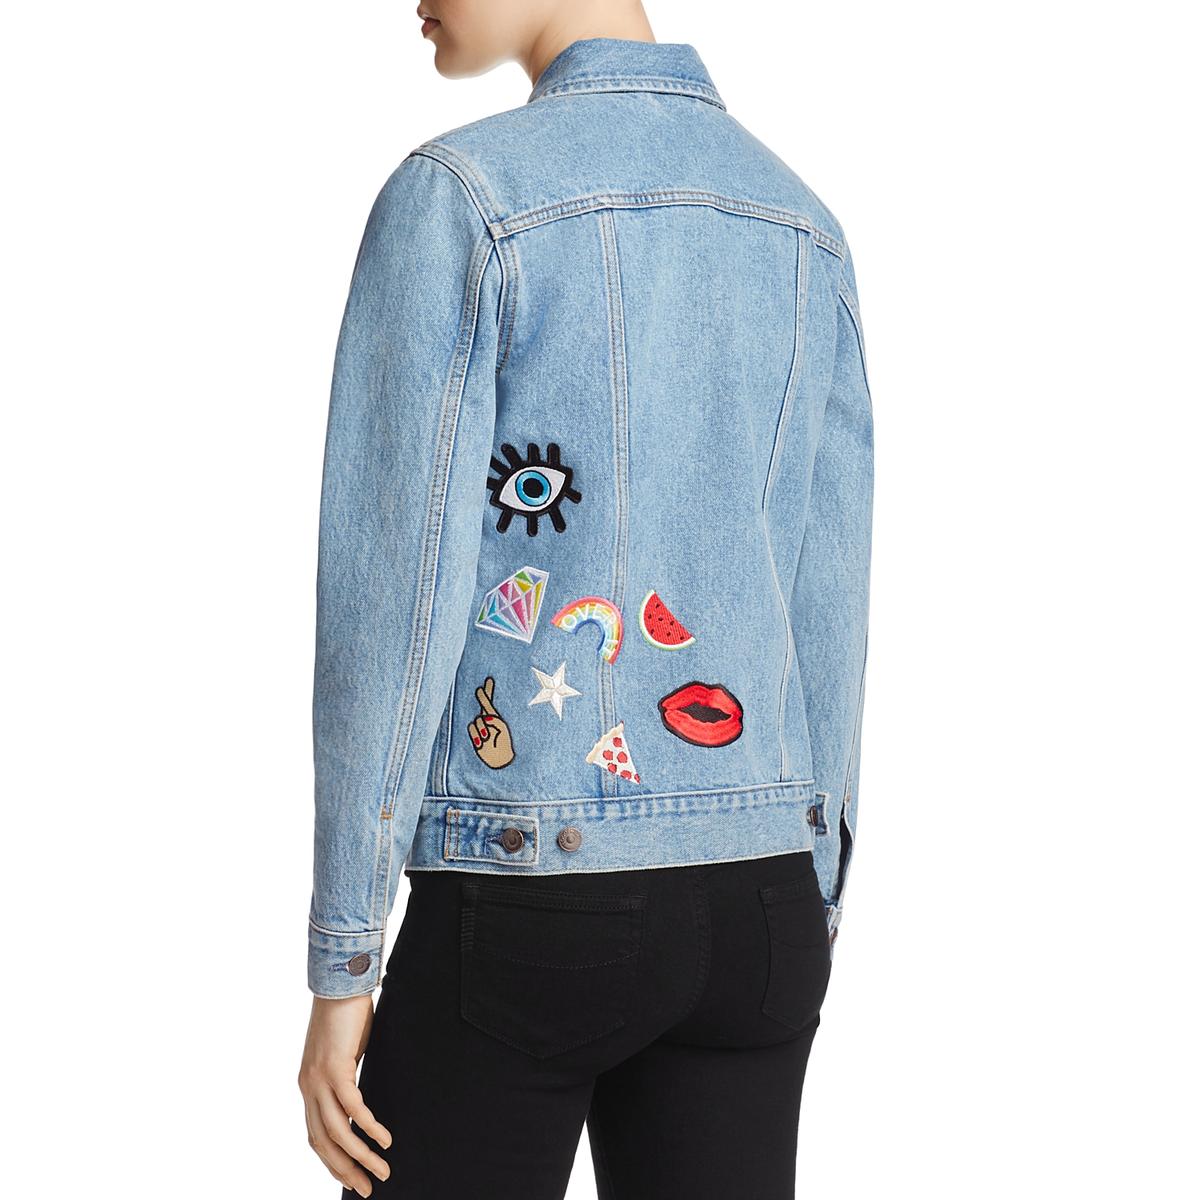 Logophile Womens Blue Embroidered Light Wash Denim Jacket Outerwear S BHFO 1958